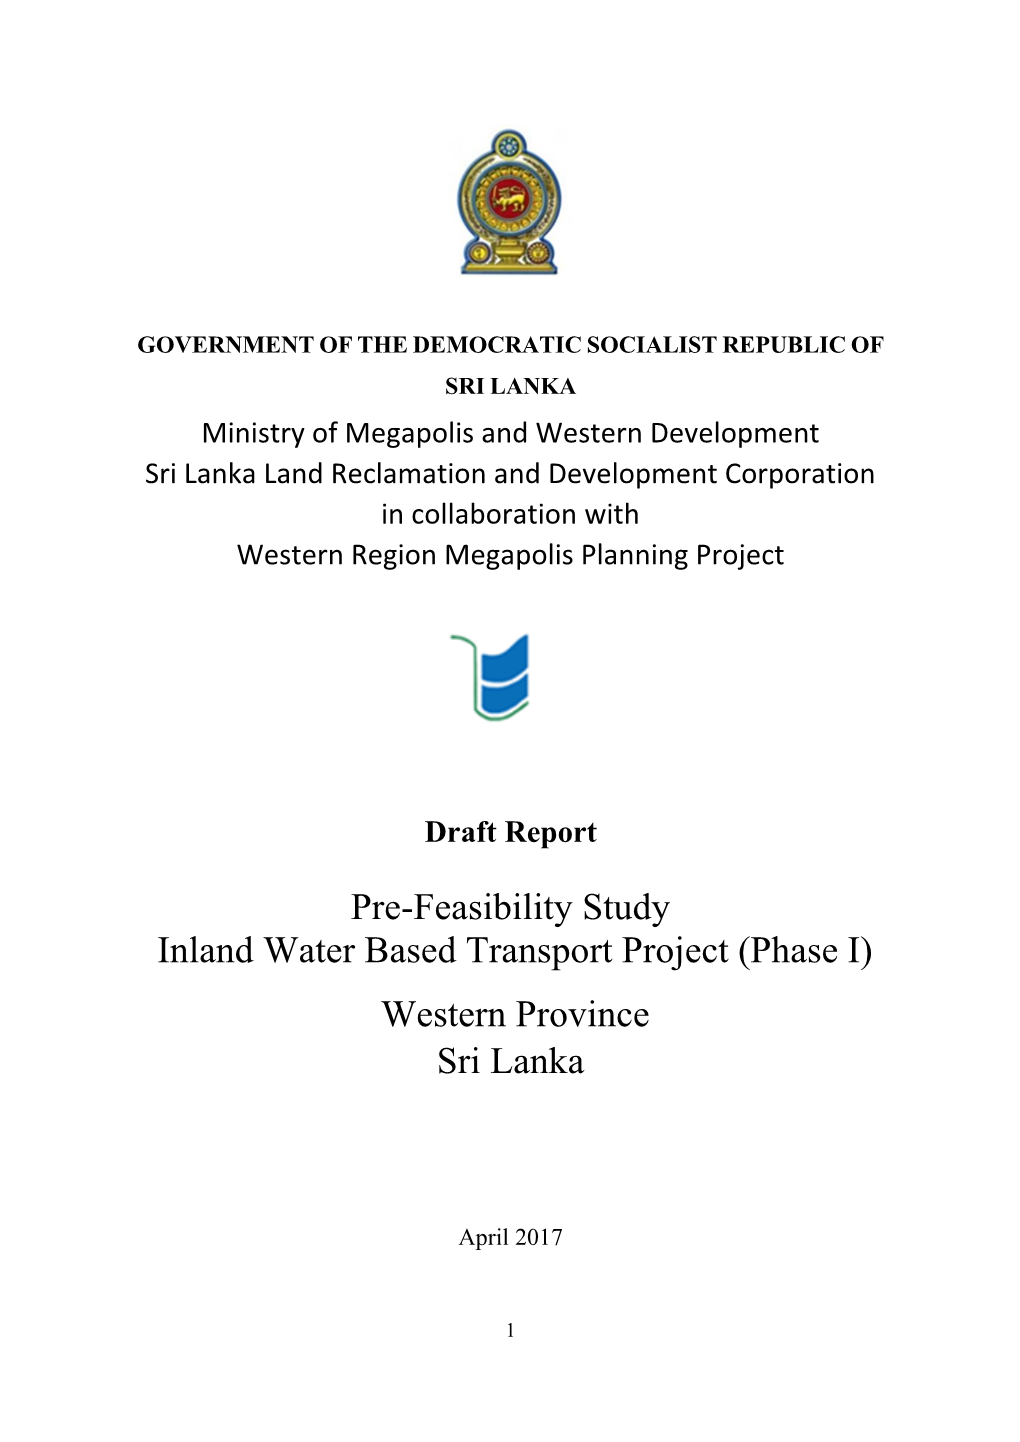 Pre-Feasibility Study Inland Water Based Transport Project (Phase I) Western Province Sri Lanka